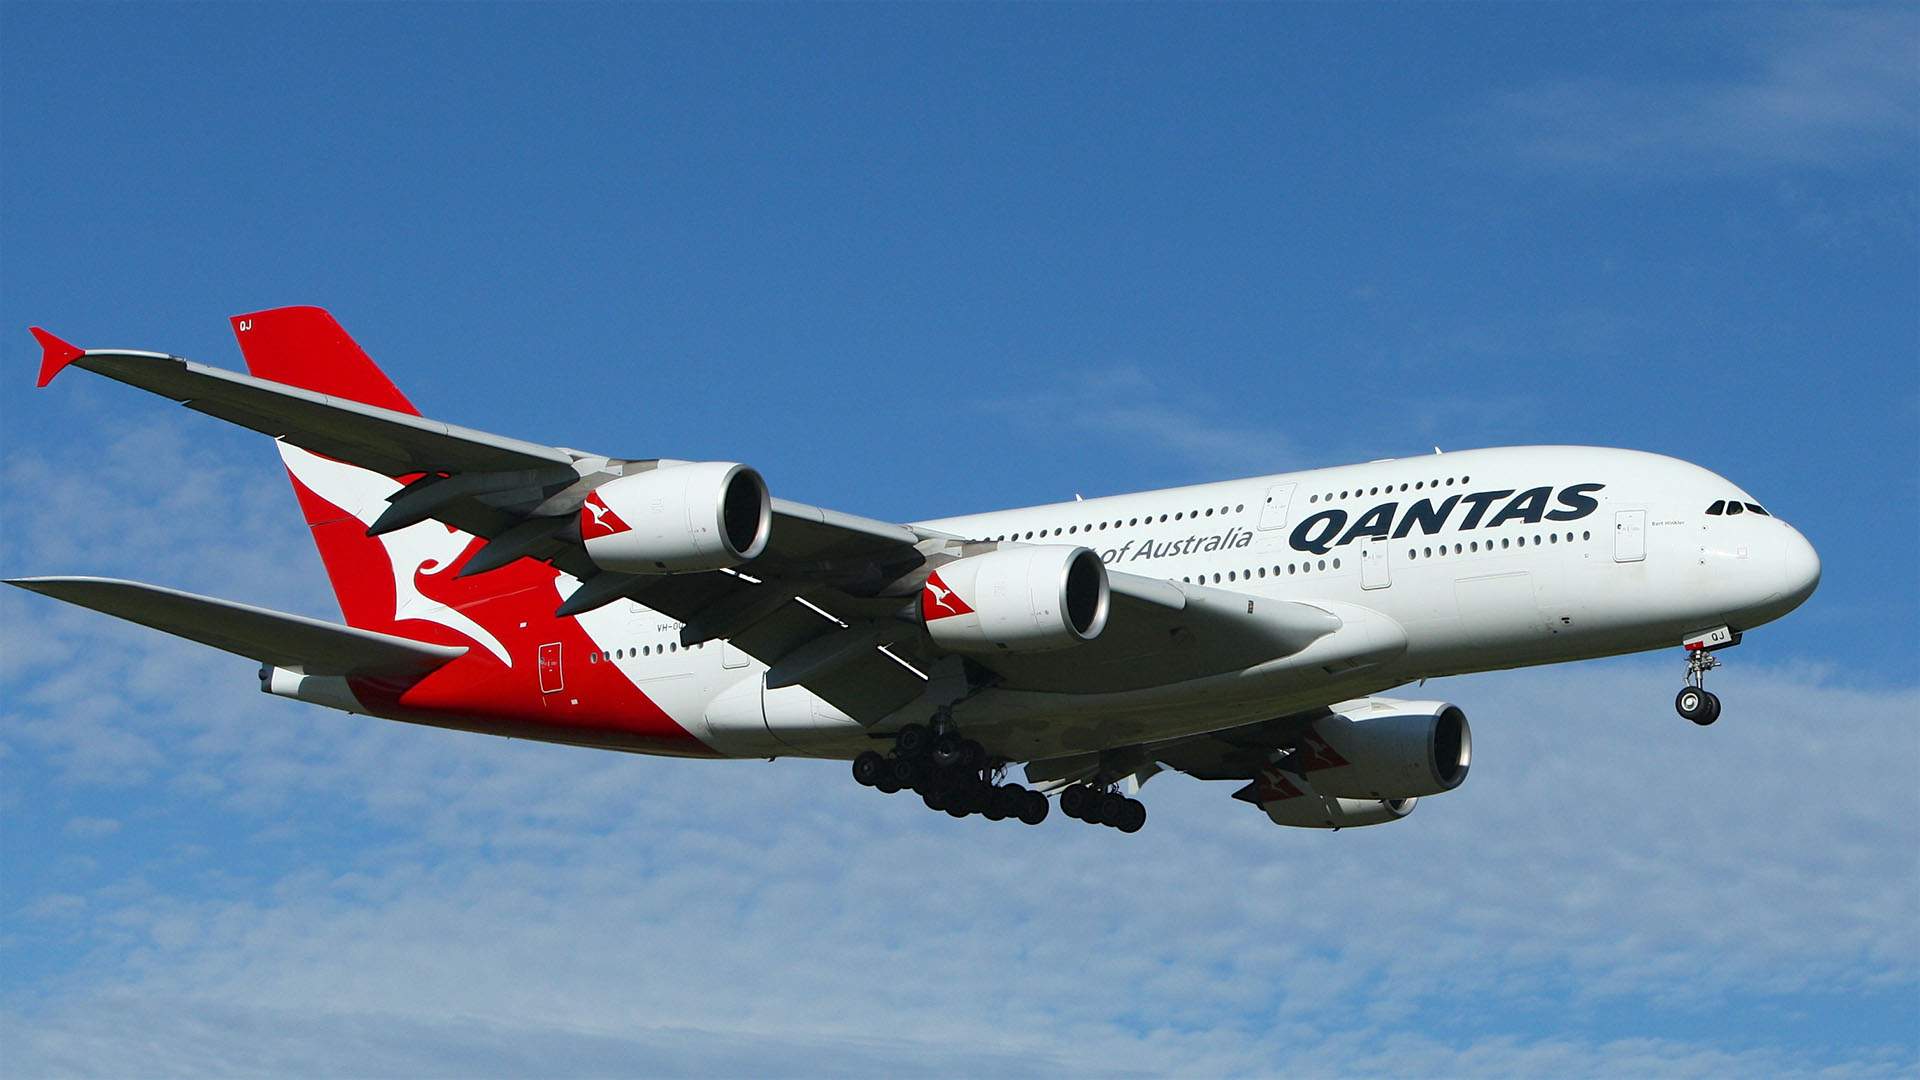 Qantas Will Use Digital Health Passes to Verify Vaccination and Testing Status When Overseas Travel Resumes